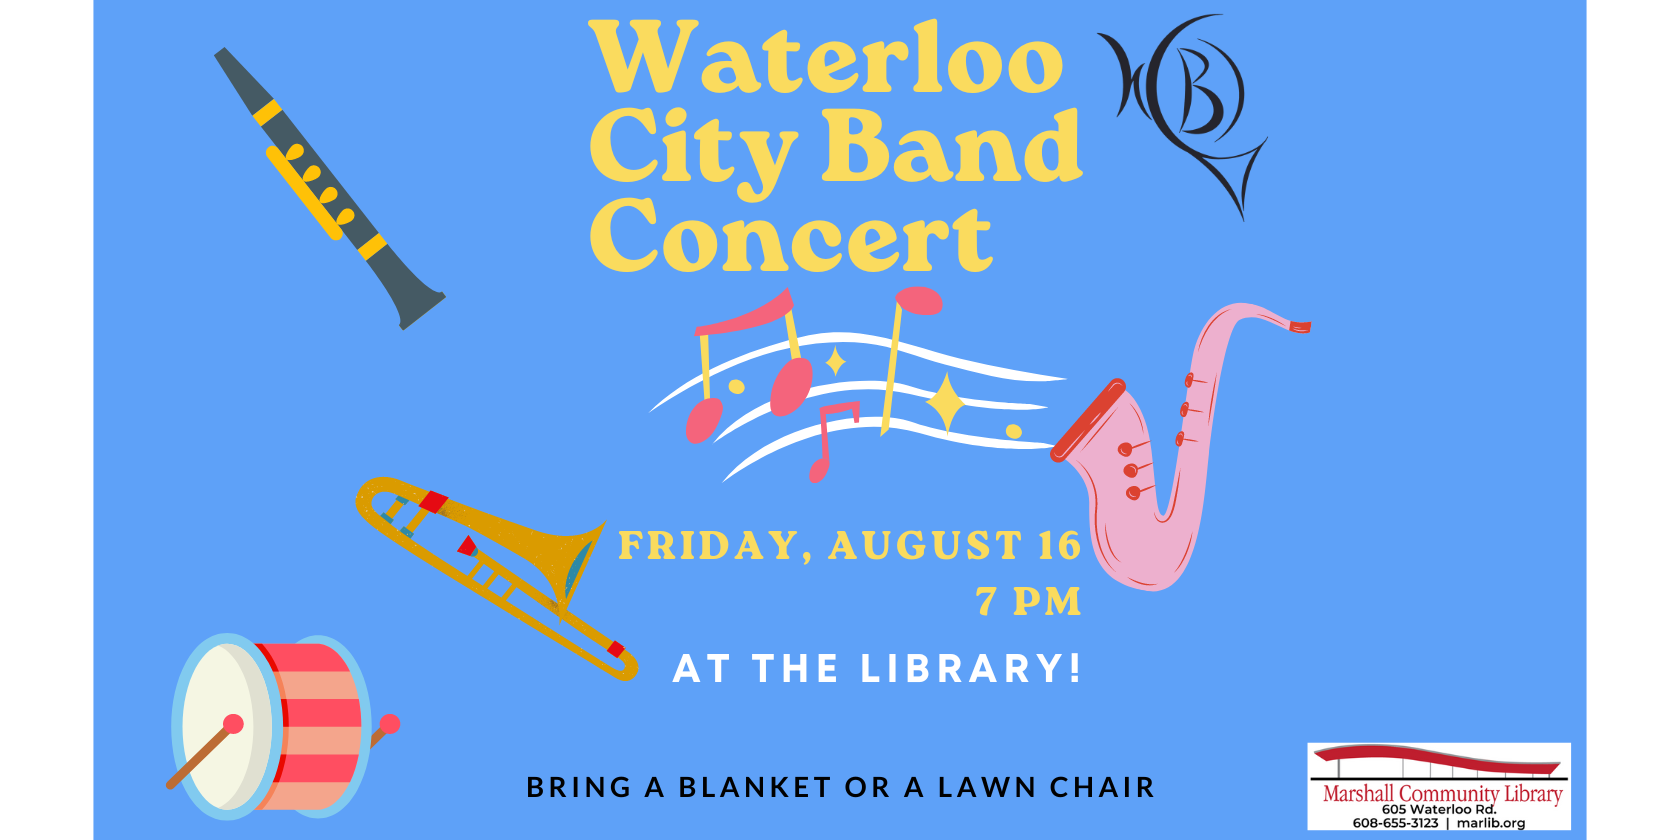 Waterloo City Band Concert - August 16th, 7 PM